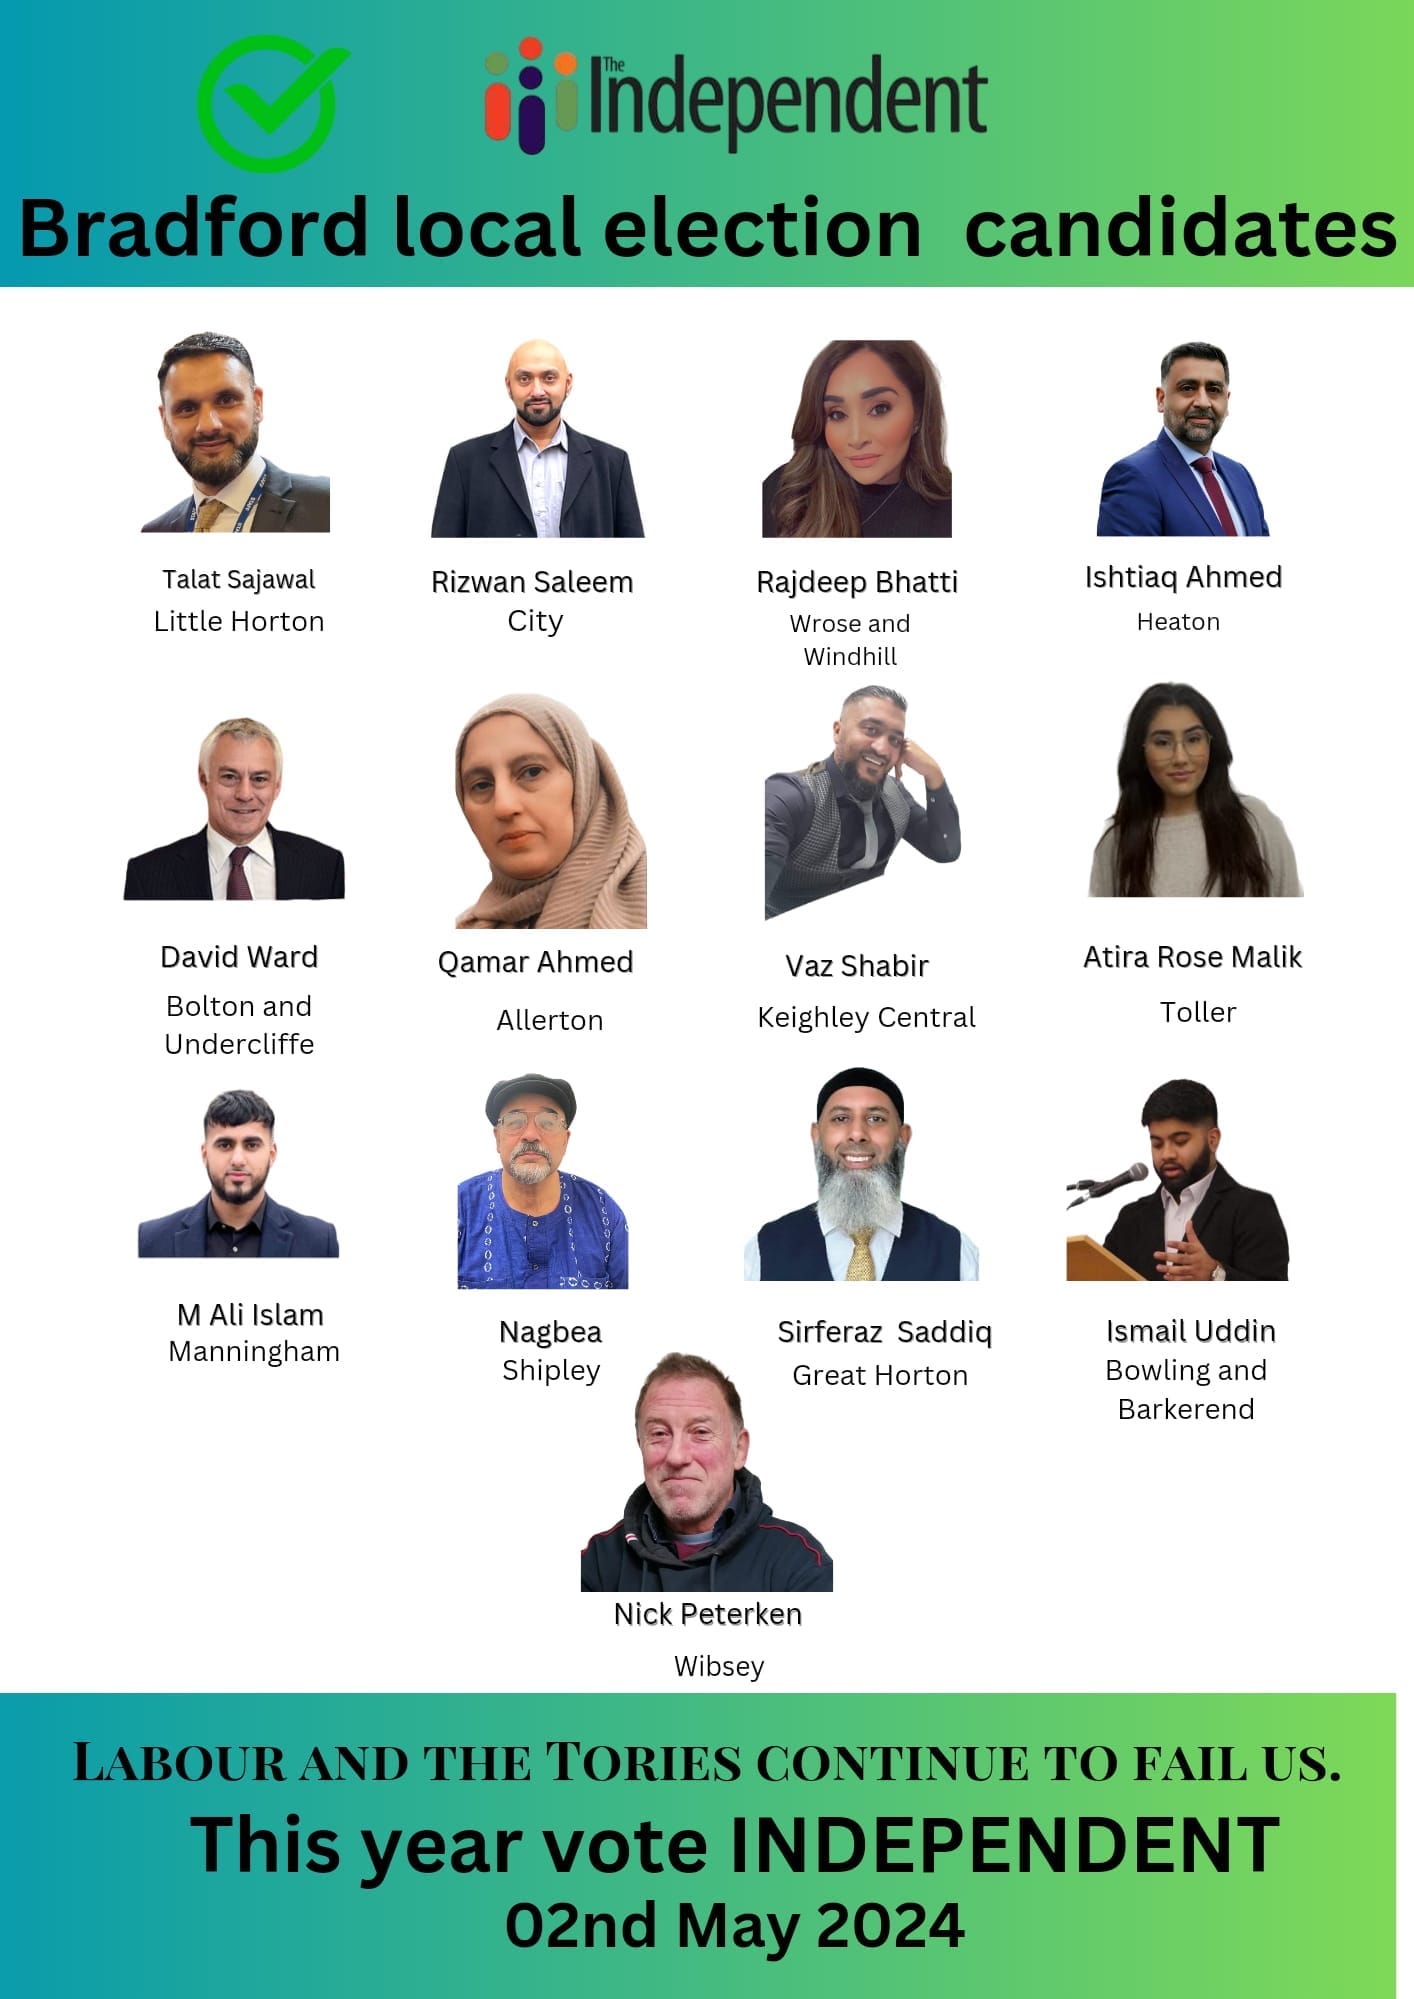 May be an image of 13 people and text that says "Independent Bradford local election candidates Talat Sajawal Little Horton Rizwan Saleem City Rajdeep Bhatti Wrose Windhill Ishtiaq Ahmed Heaton David Ward Bolton and Undercliffe Qamar Ahmed Allerton Vaz Shabir Keighley Central Atira Rose Malik Toller M Ali Islam Manningham Nagbea Shipley Sirferaz Saddiq Great Horton Ismail IsmU Uddin Bowling and Barkerend Nick Peterken Wibsey LABOUR AND THE TORIES CONTINUE TO FAIL US. This year vote INDEPENDENT 02nd May 2024"